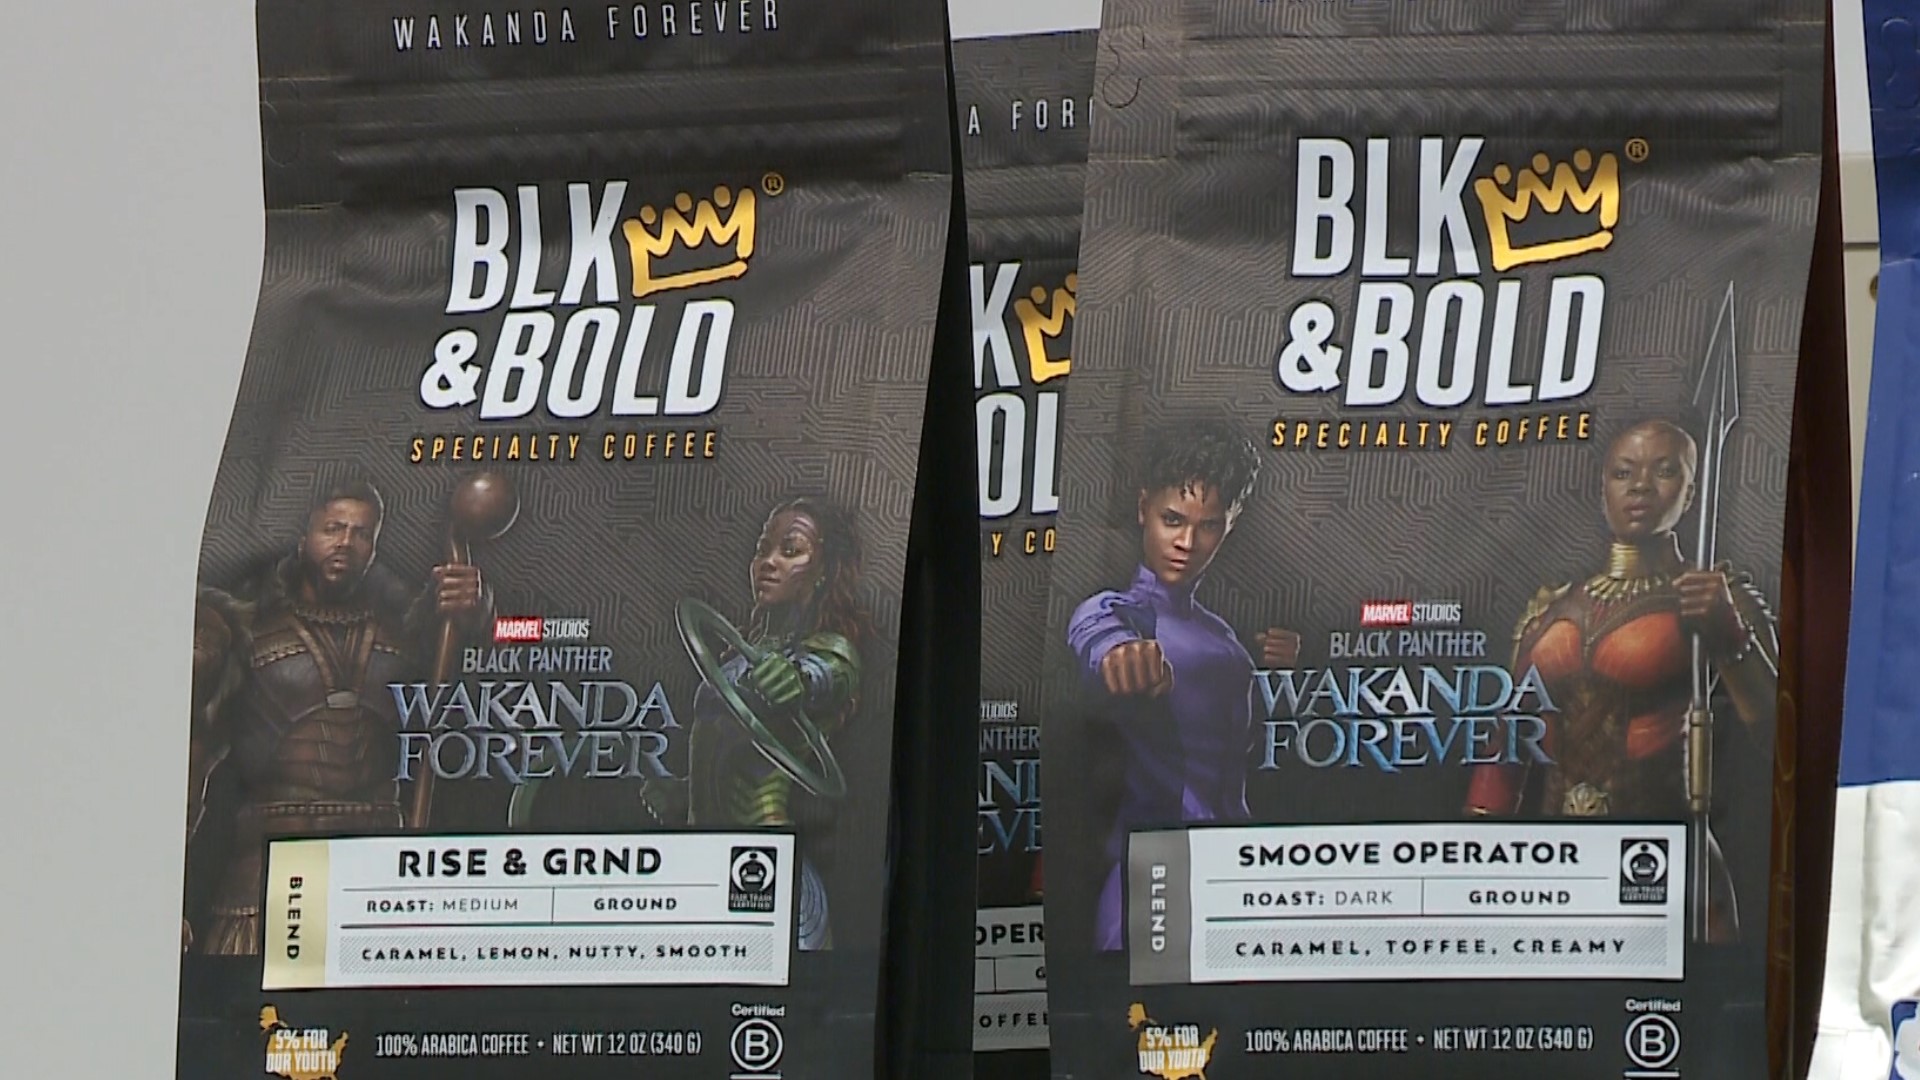 The roastery is now selling two of its signature blends, "Smoove Operator" and "Rise & GRND!", in limited-edition "Wakanda Forever" packaging.